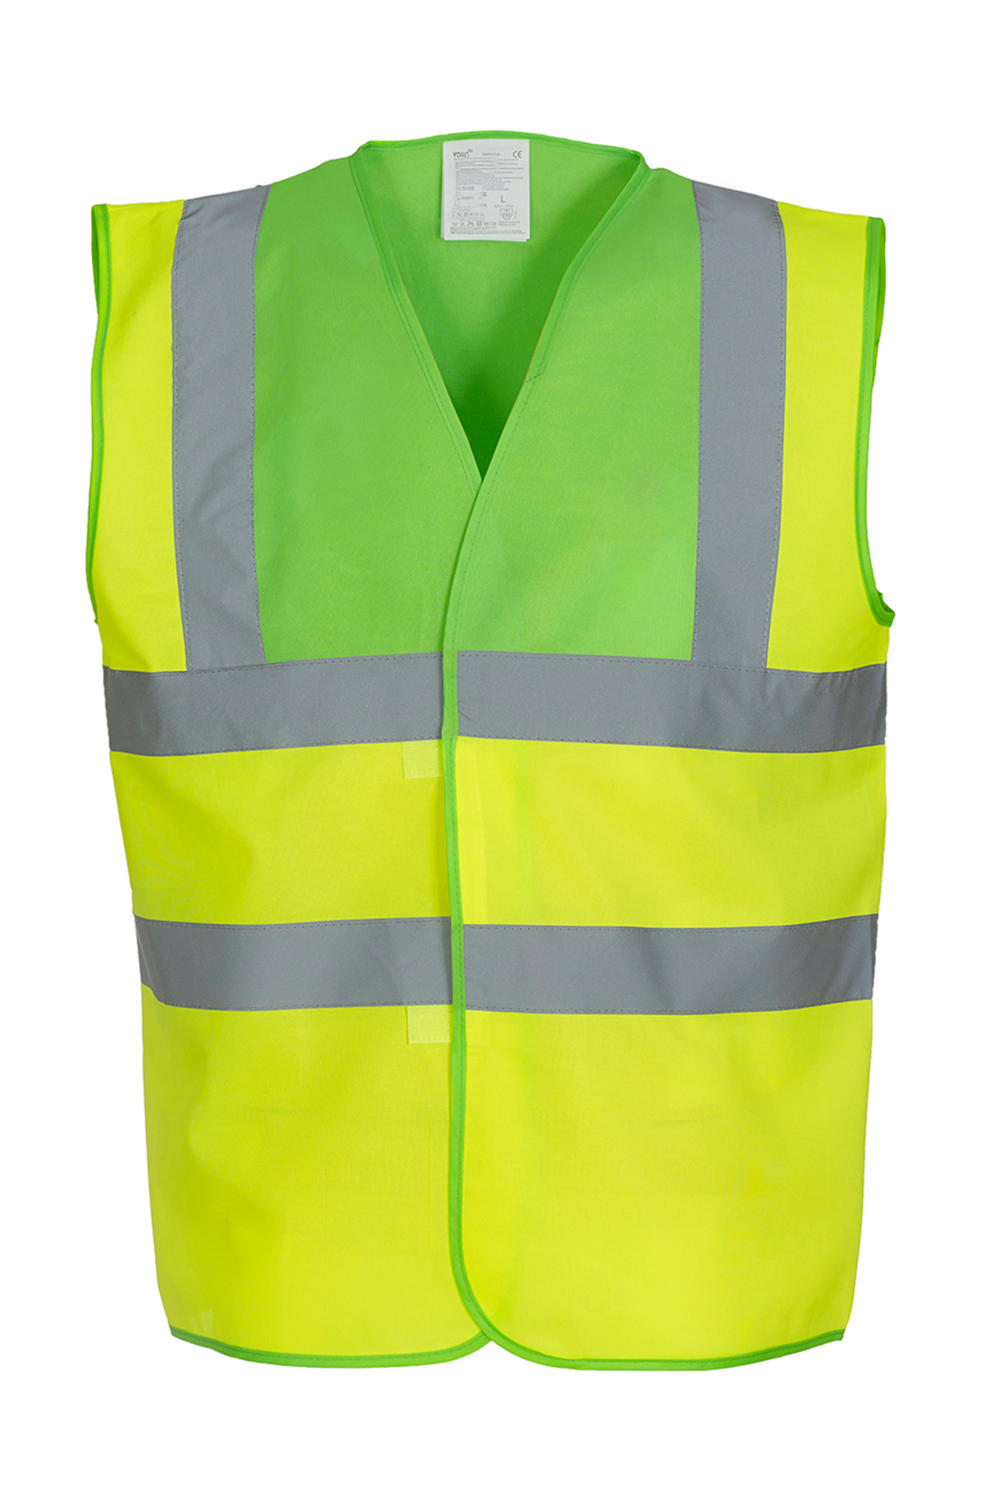  Fluo 2 Band + Brace Waistcoat in Farbe Fluo Yellow/Lime